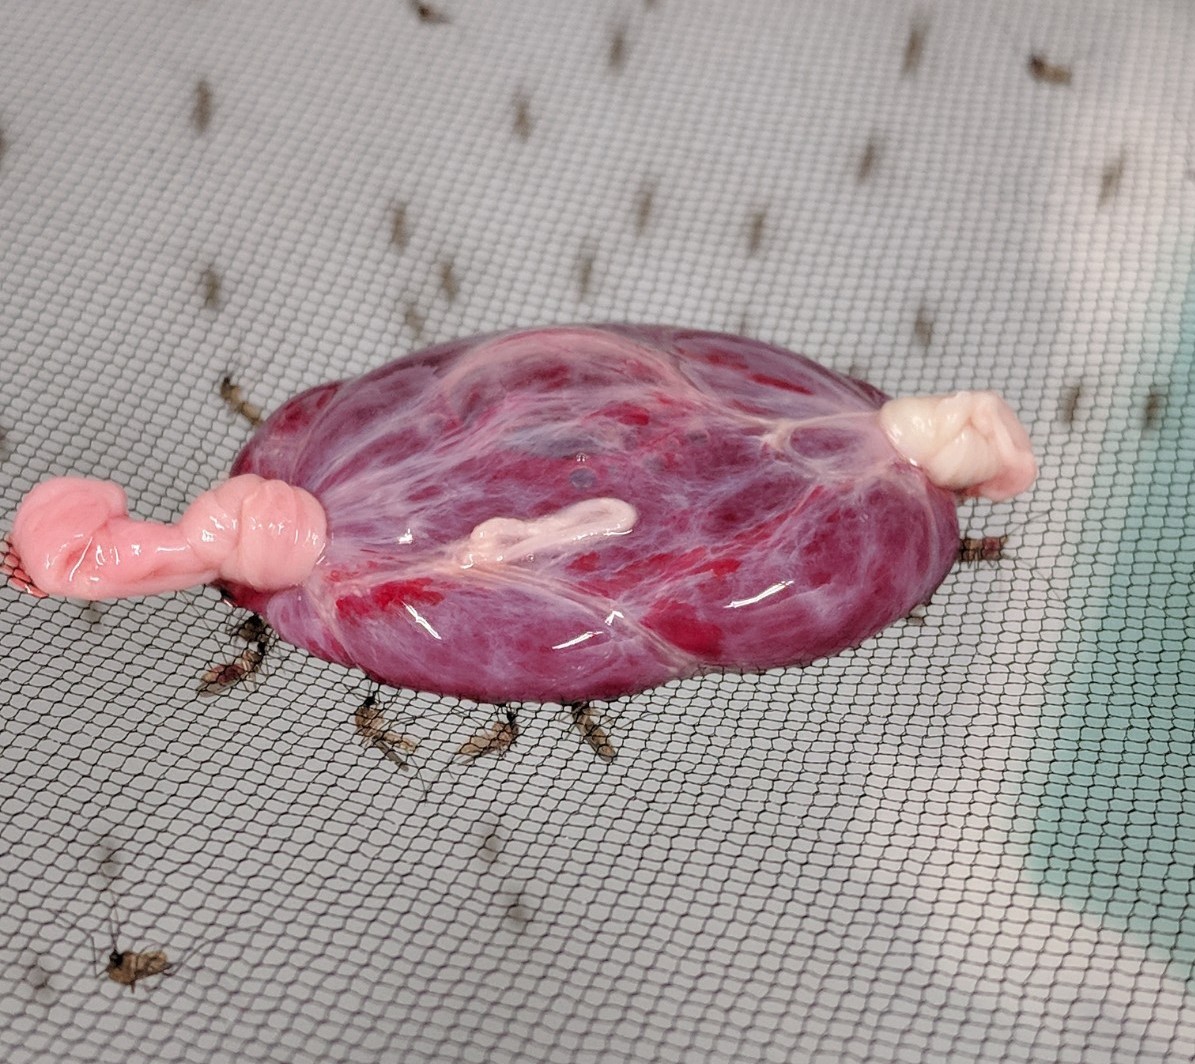  Female mosquitoes feed on a blood meal. The blood is enclosed in a sausage casing and placed on the mosquito cage. Photo courtesy of Dr. Laura Ahlers/Washington State University